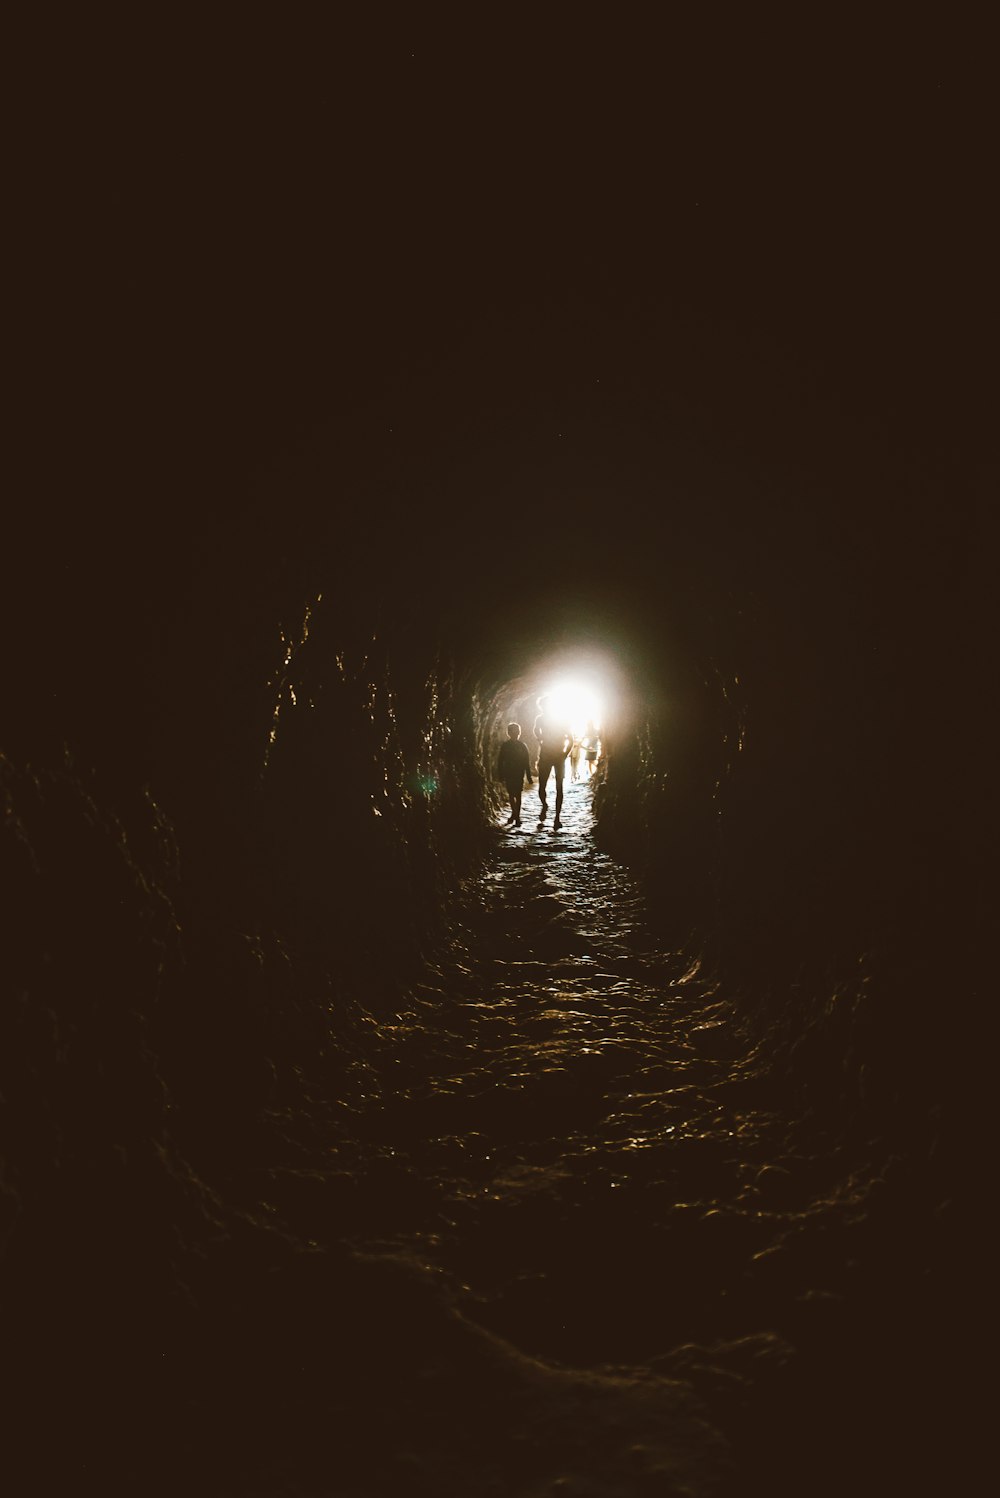 a group of people walking into a dark tunnel